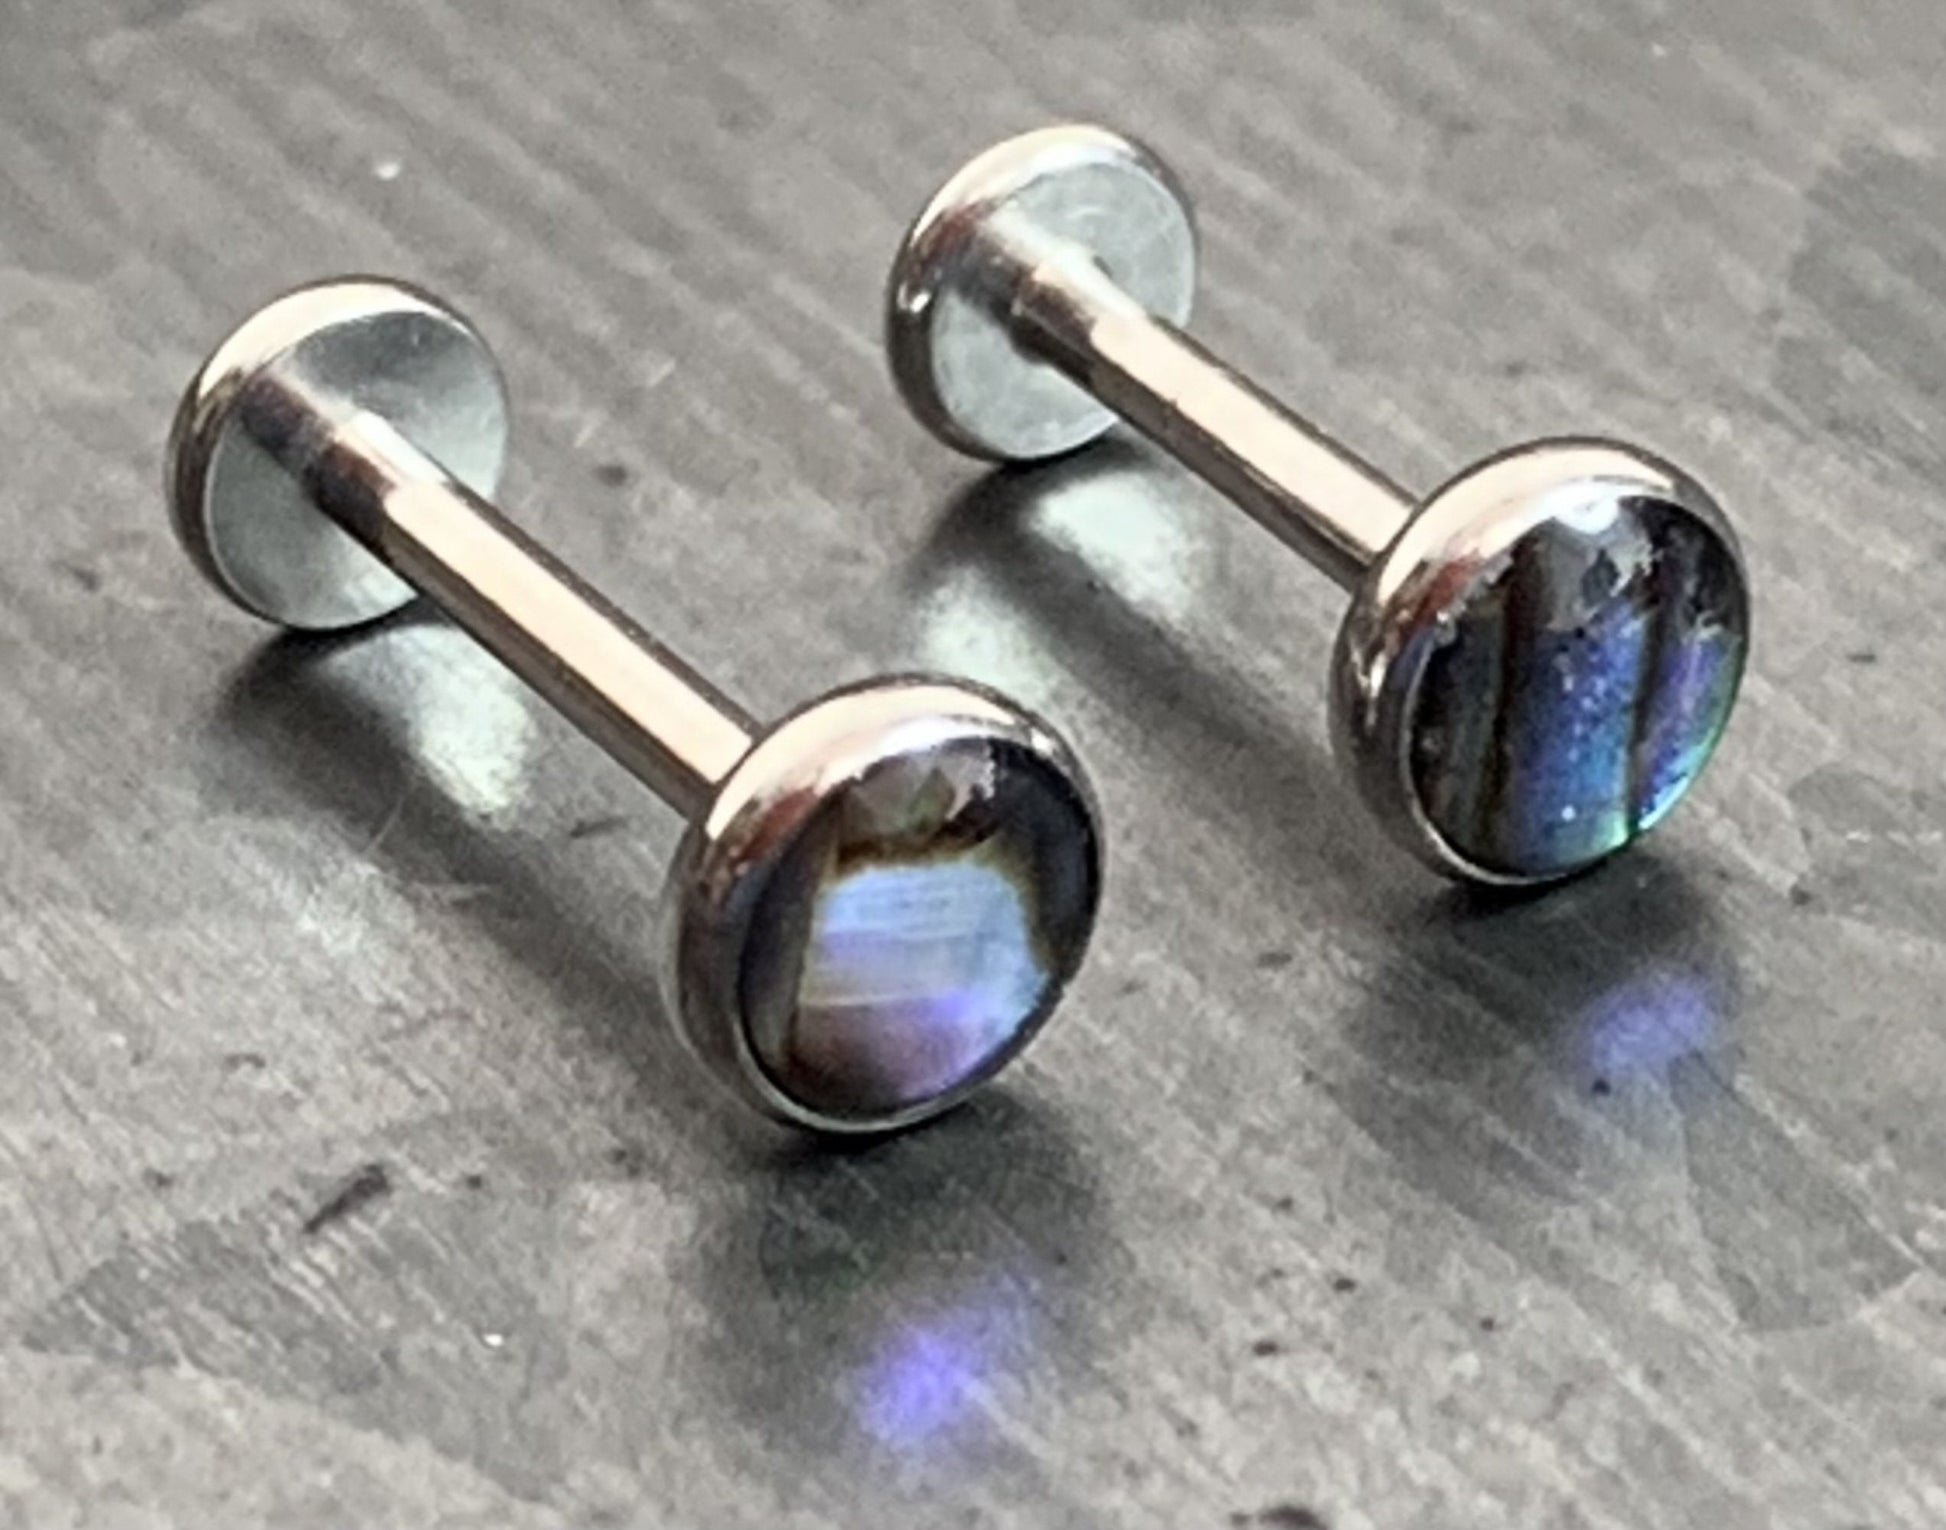 1 Piece Abalone Shell Steel Labret Internally Threaded Stud - 16g - Post Length 8mm or 10mm Available!